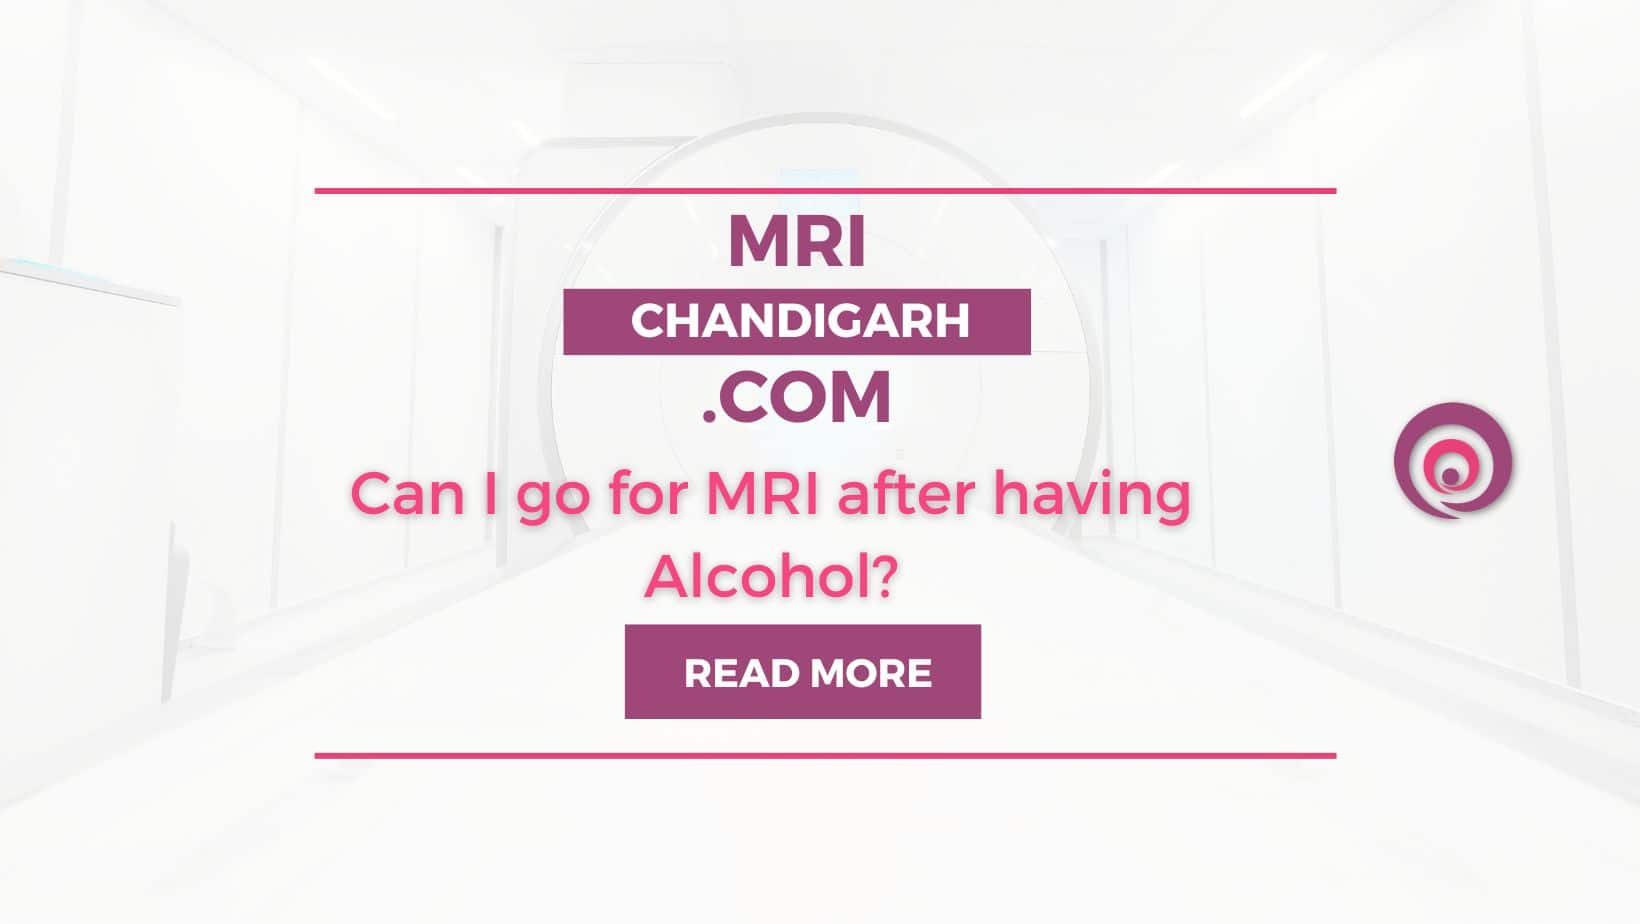 Can I go for MRI after having Alcohol?